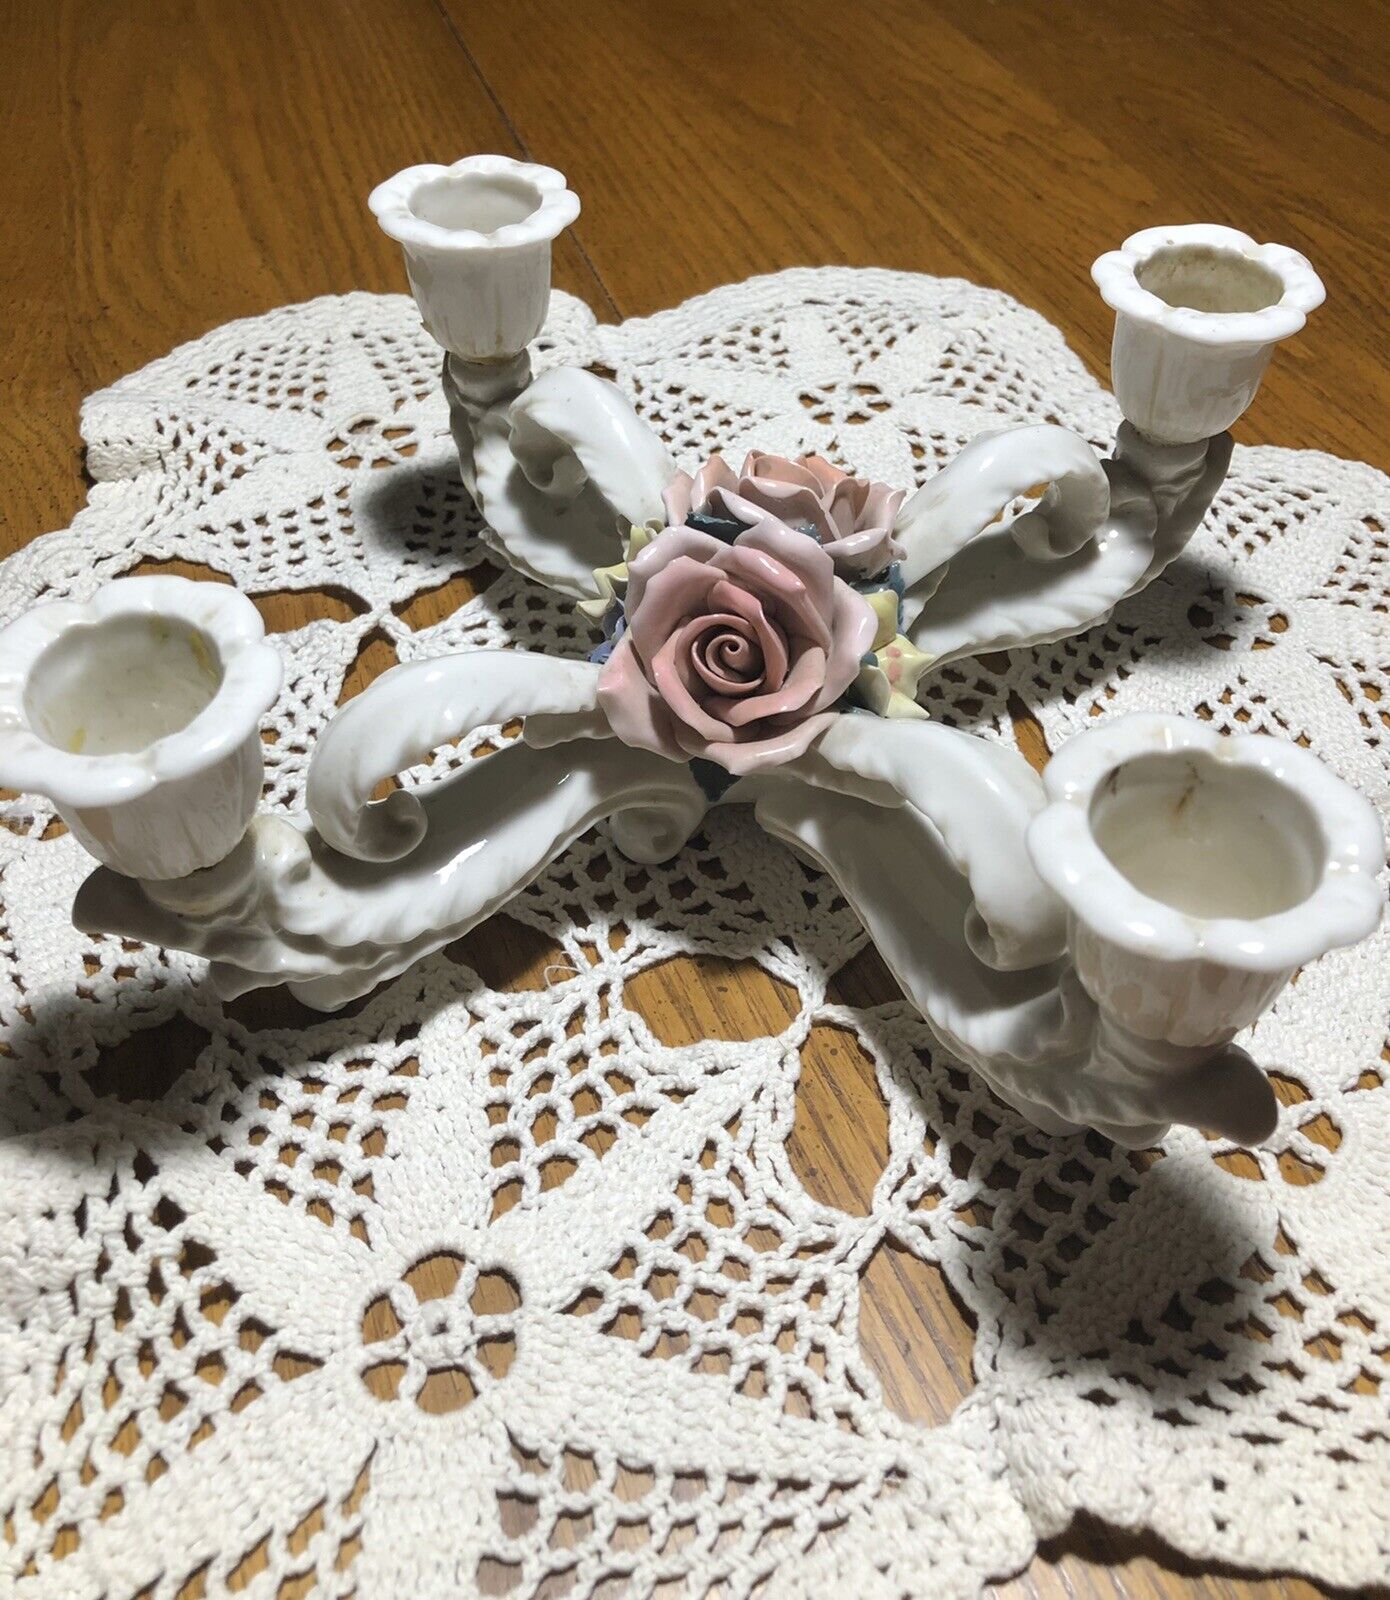 Karl ENS Porcelain Pink Roses 1919-1945 Centerpiece Four 4 Candle Germany